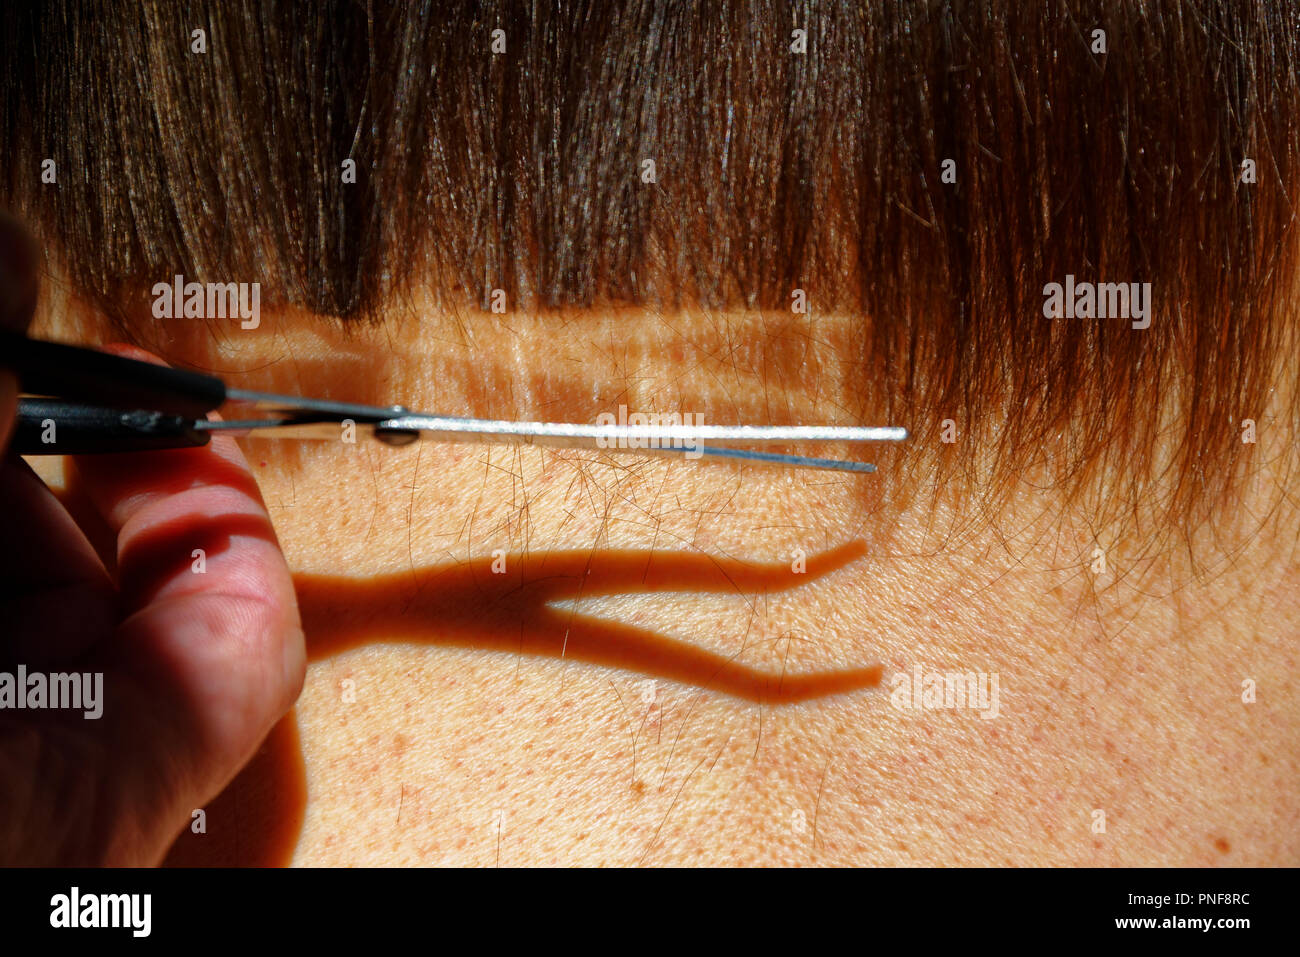 A hair cut showing scissors with their reflection shining in the hair and the shadow of the scissors on the neck underneath. Stock Photo